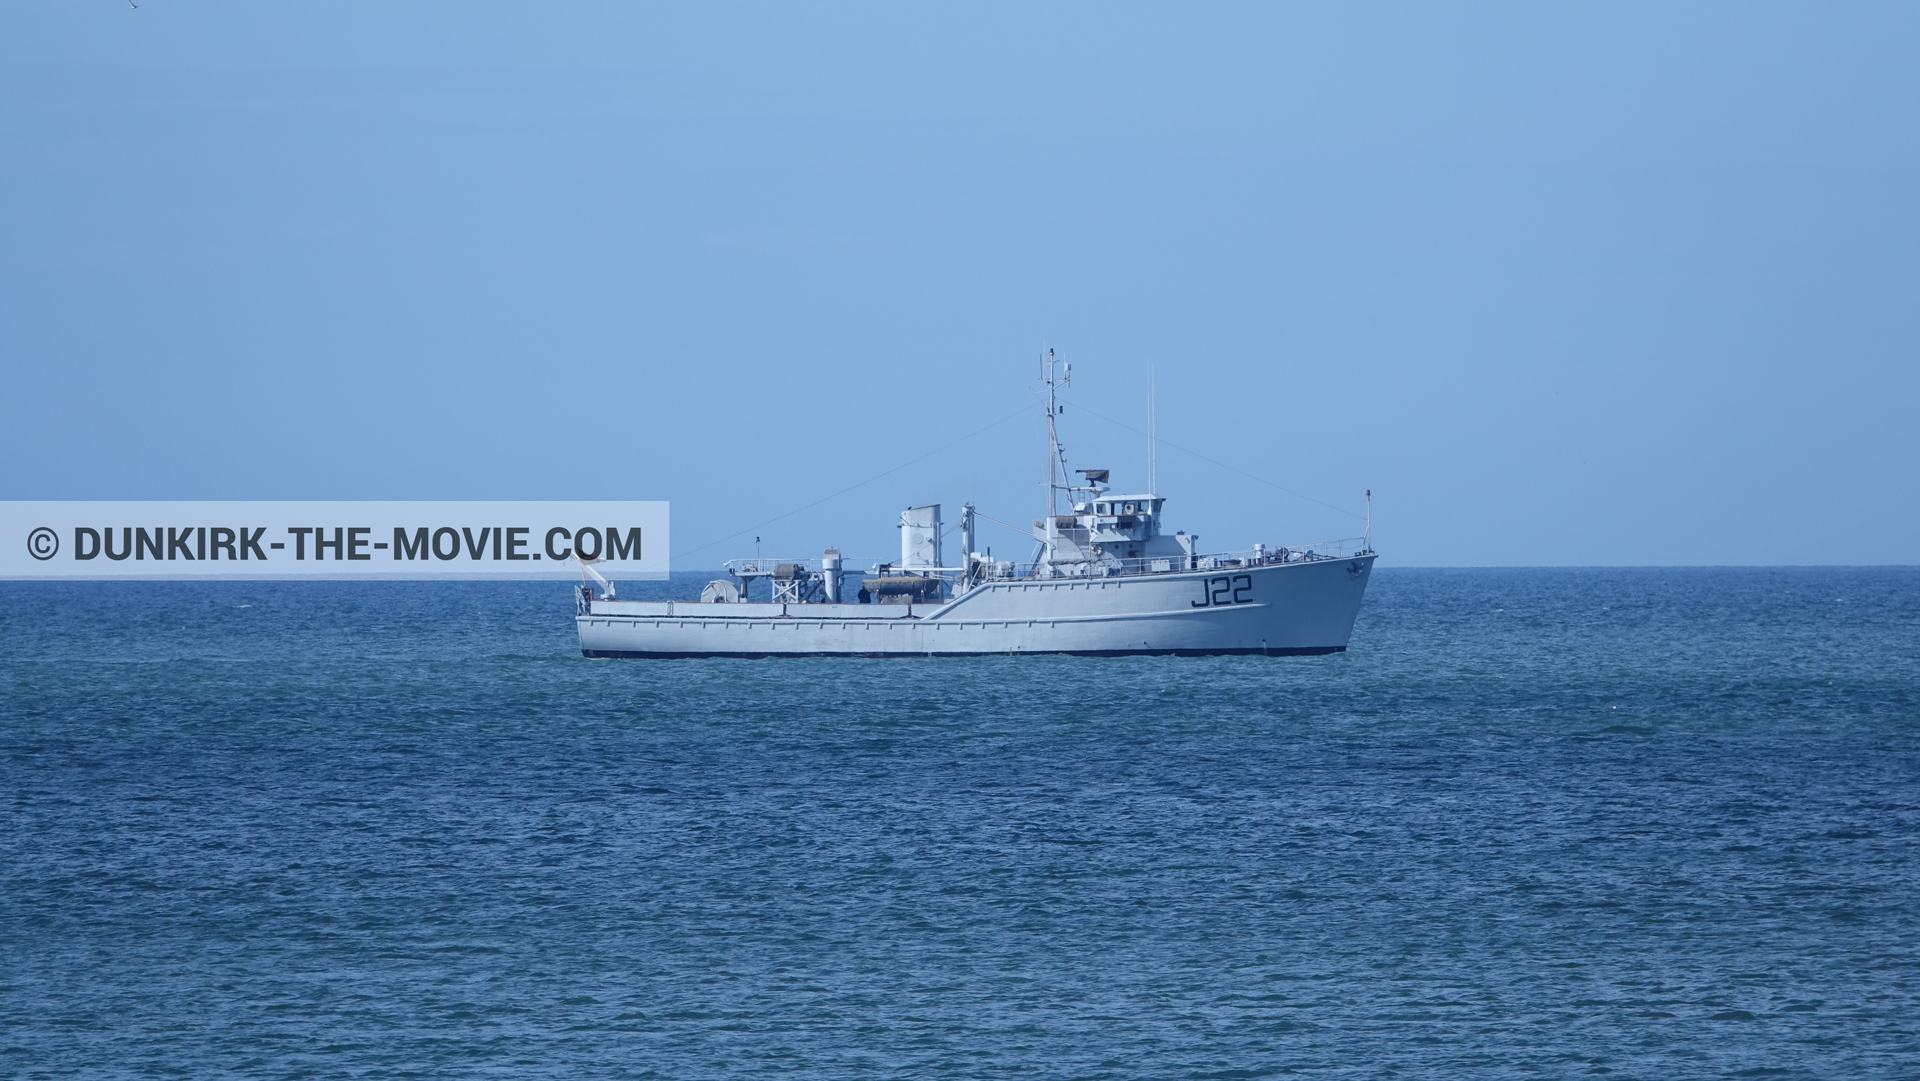 Picture with blue sky, J22 -Hr.Ms. Naaldwijk, calm sea,  from behind the scene of the Dunkirk movie by Nolan